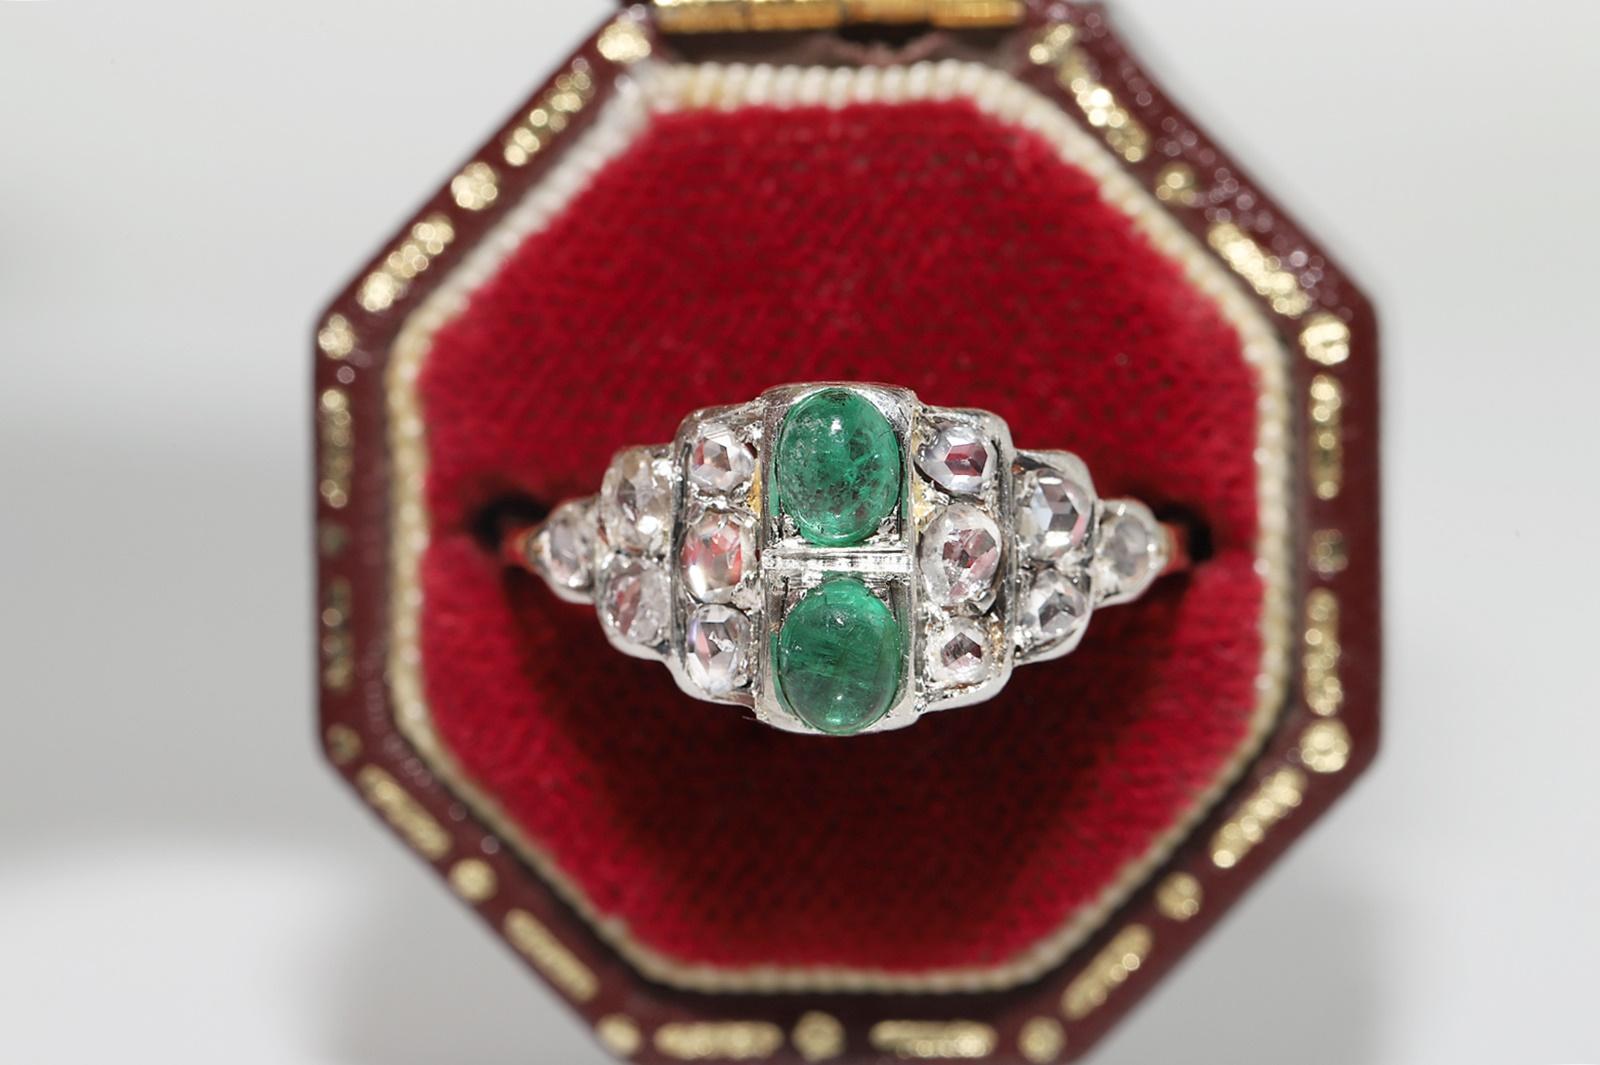 Women's Antique Circa 1900s 14k Gold Top Silver Natural Rose Cut Diamond Emerald Ring For Sale